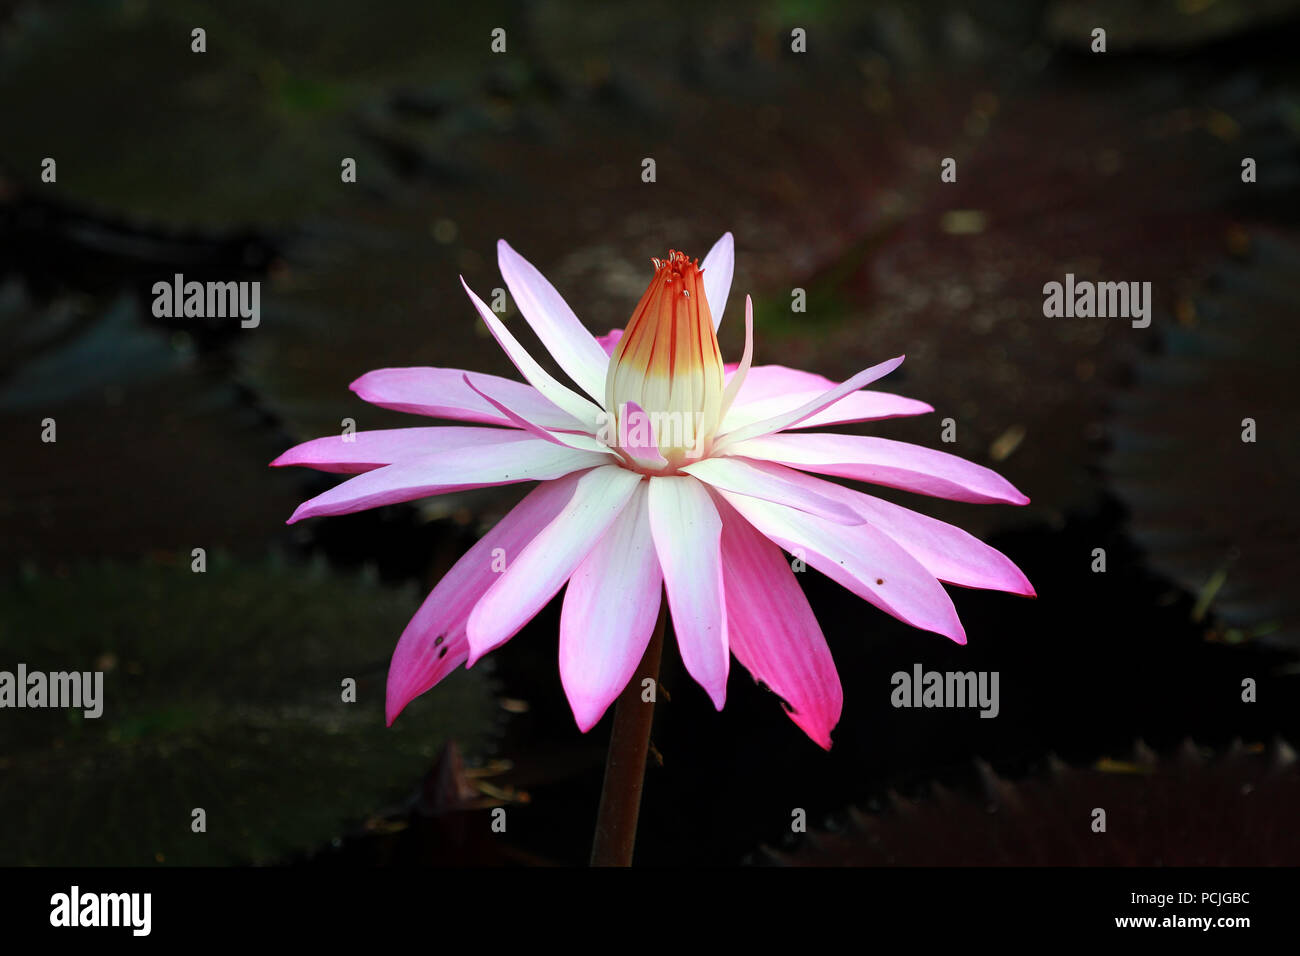 Close-up of a lotus flower, Indonesia Stock Photo